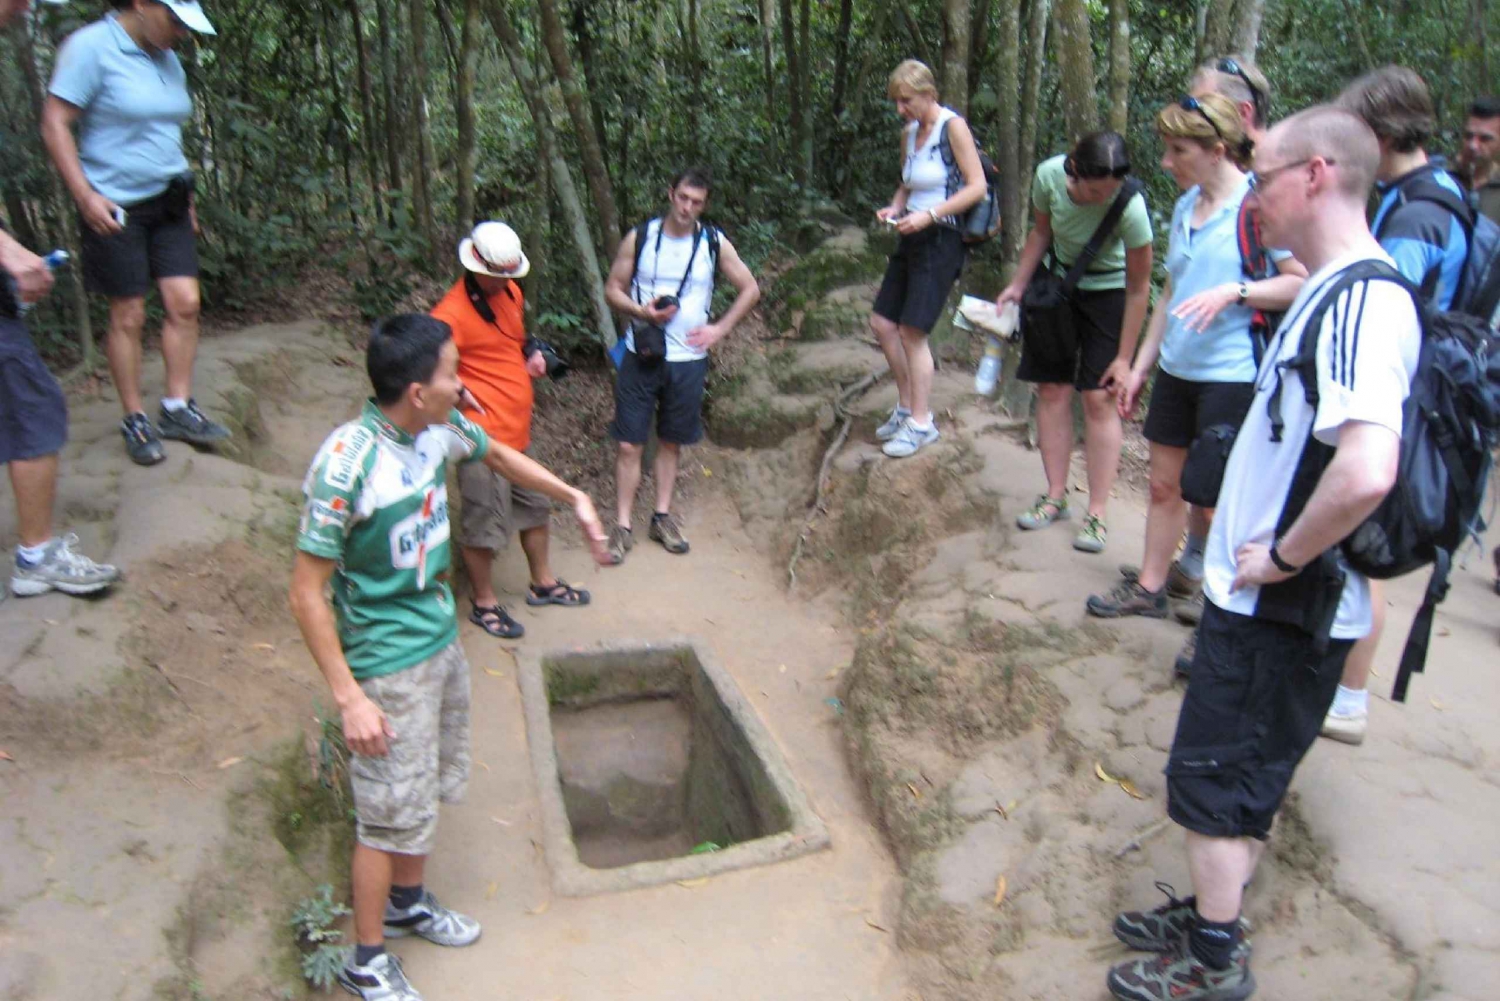 Photograph-the-Cu-Chi-Tunnels-Historical-Significance